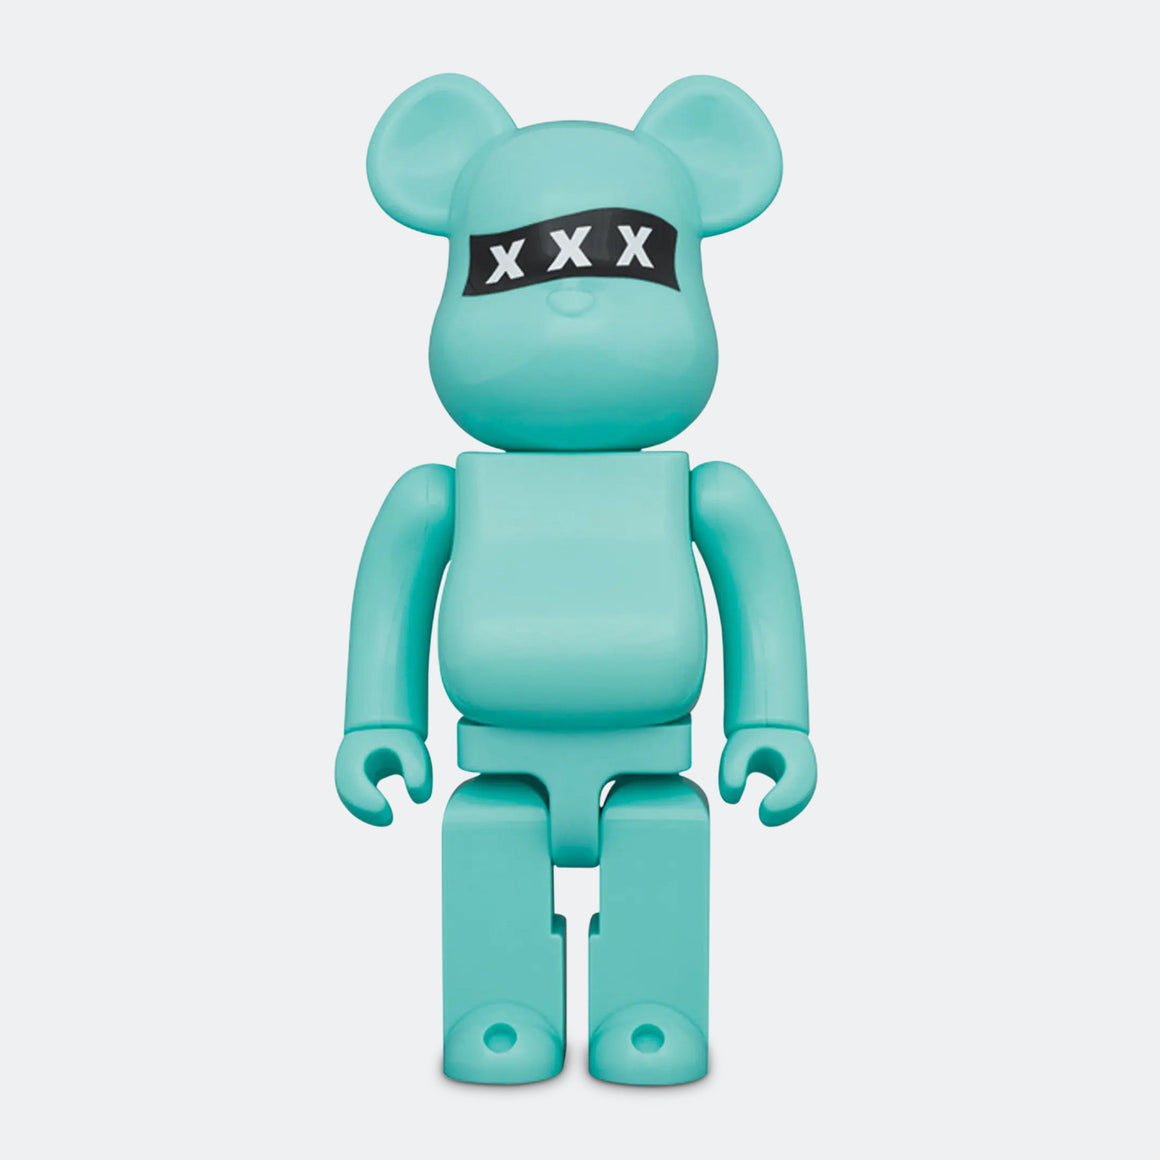 Medicom Toy - Be@rbrick × God Selection XXX 400% Set - 10th Anniversary - UP THERE